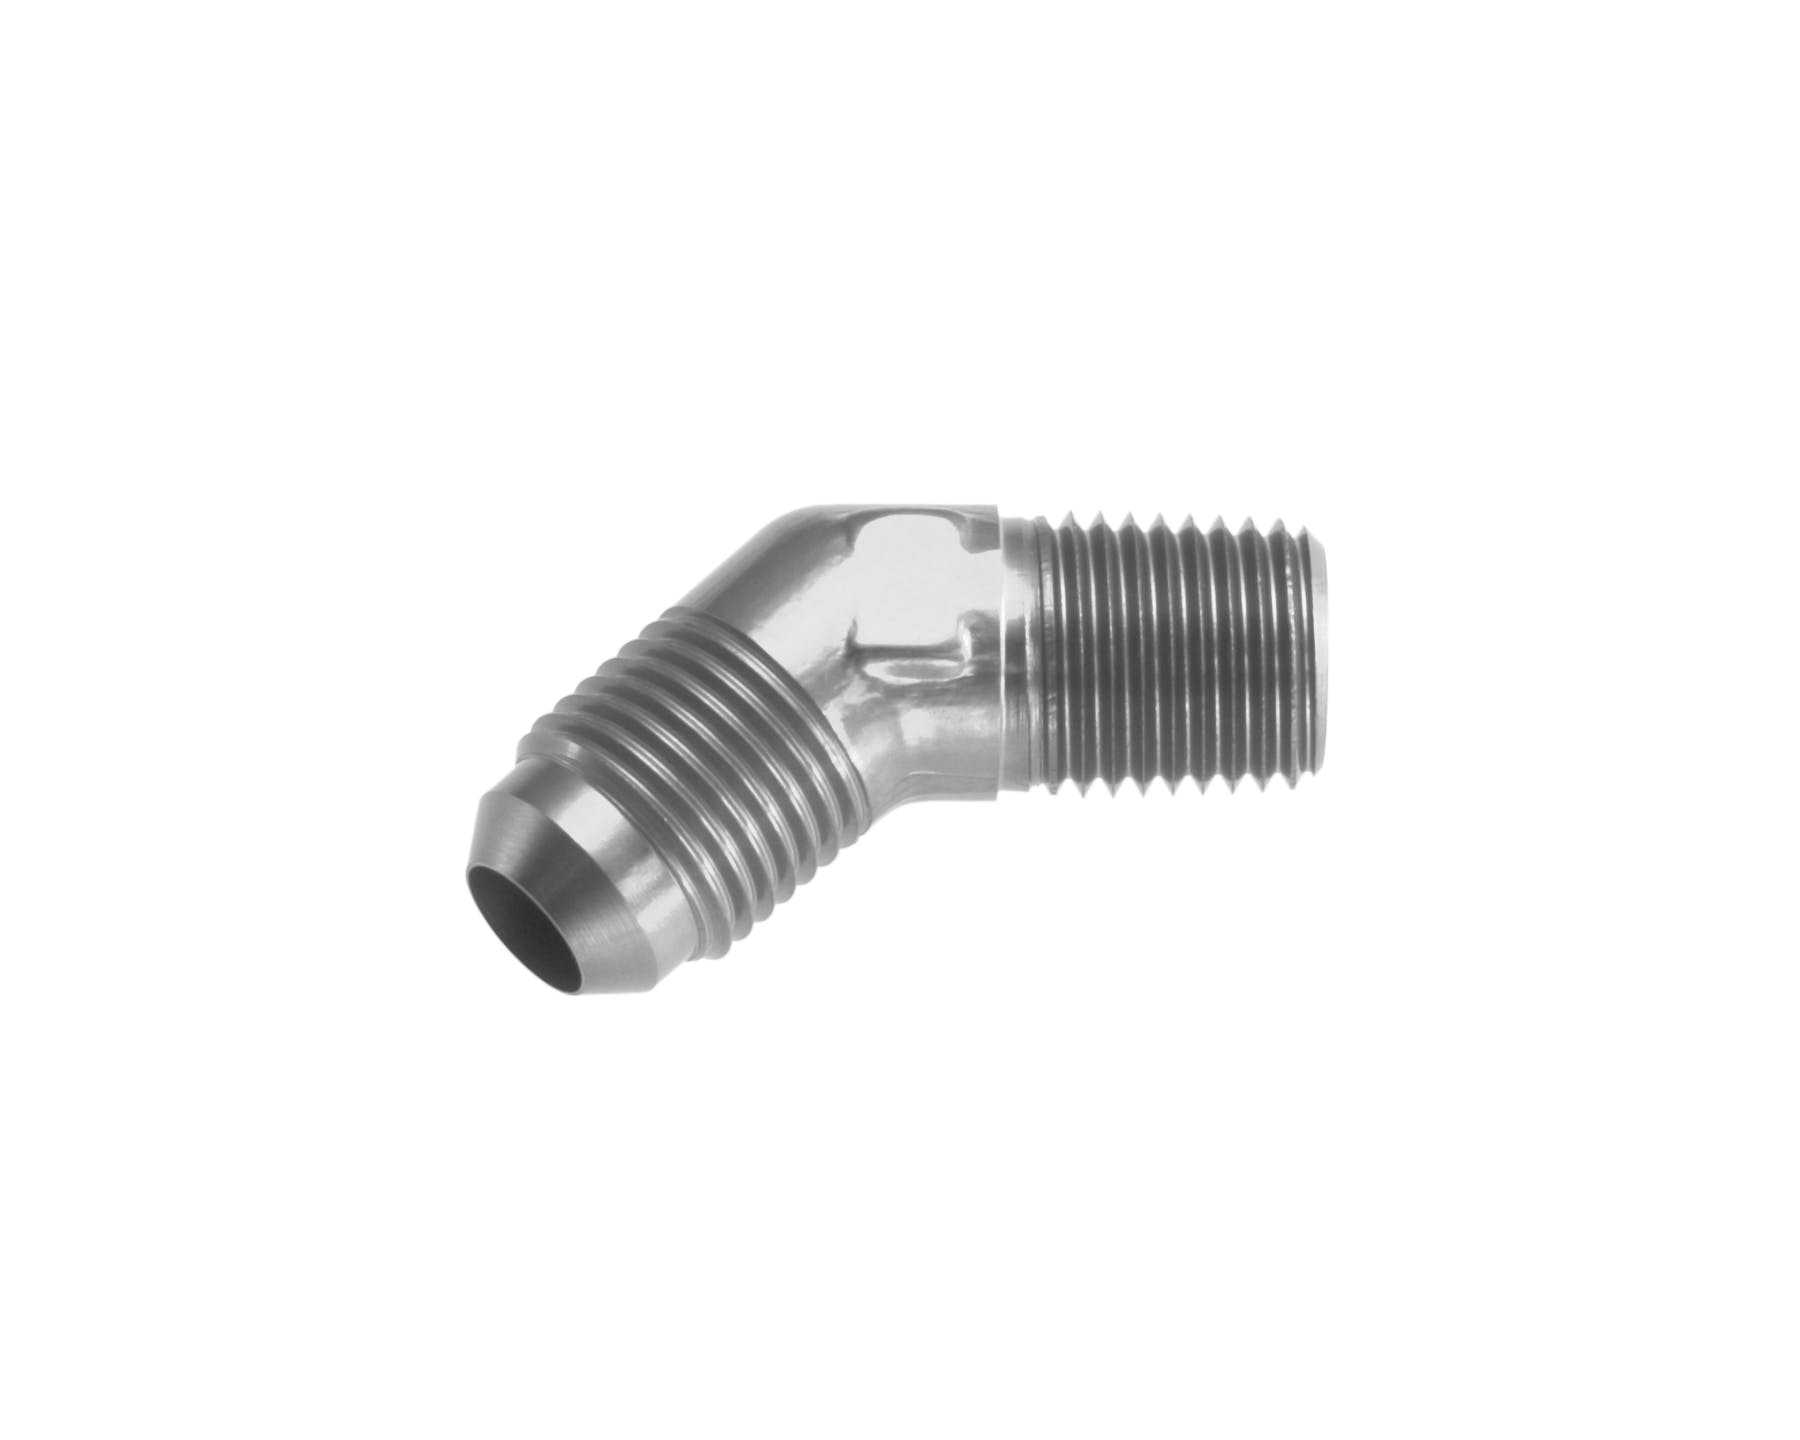 Redhorse Performance 823-10-08-5 -10 45 degree Male adapter to -08 (1/2in) NPT Male - clear